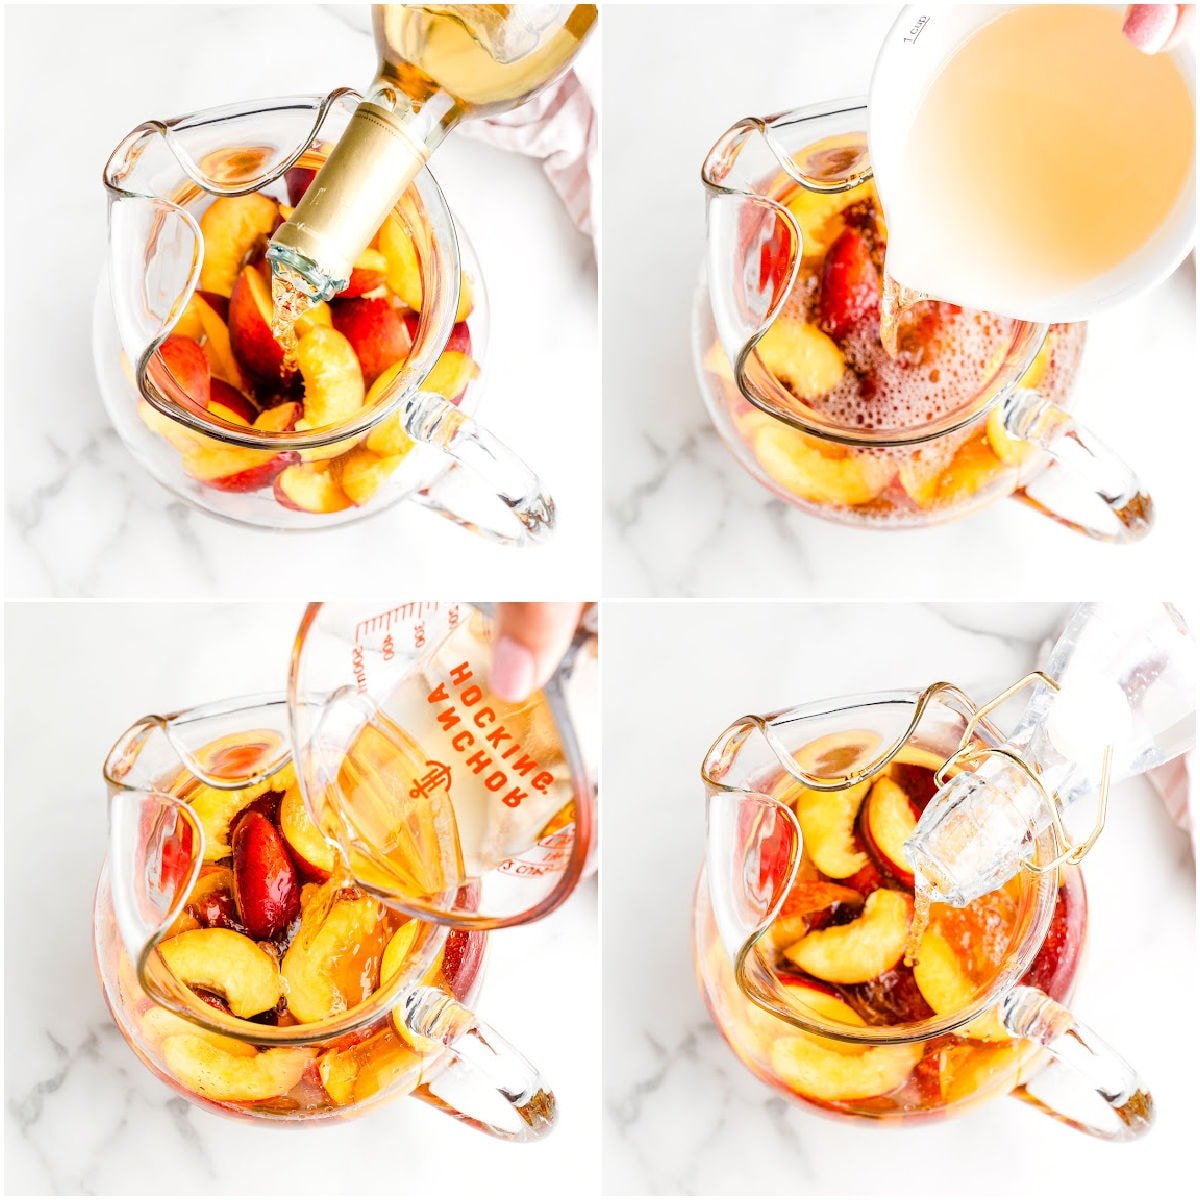 four image collage showing how to make a peach sangria recipe in a large glass pitcher.